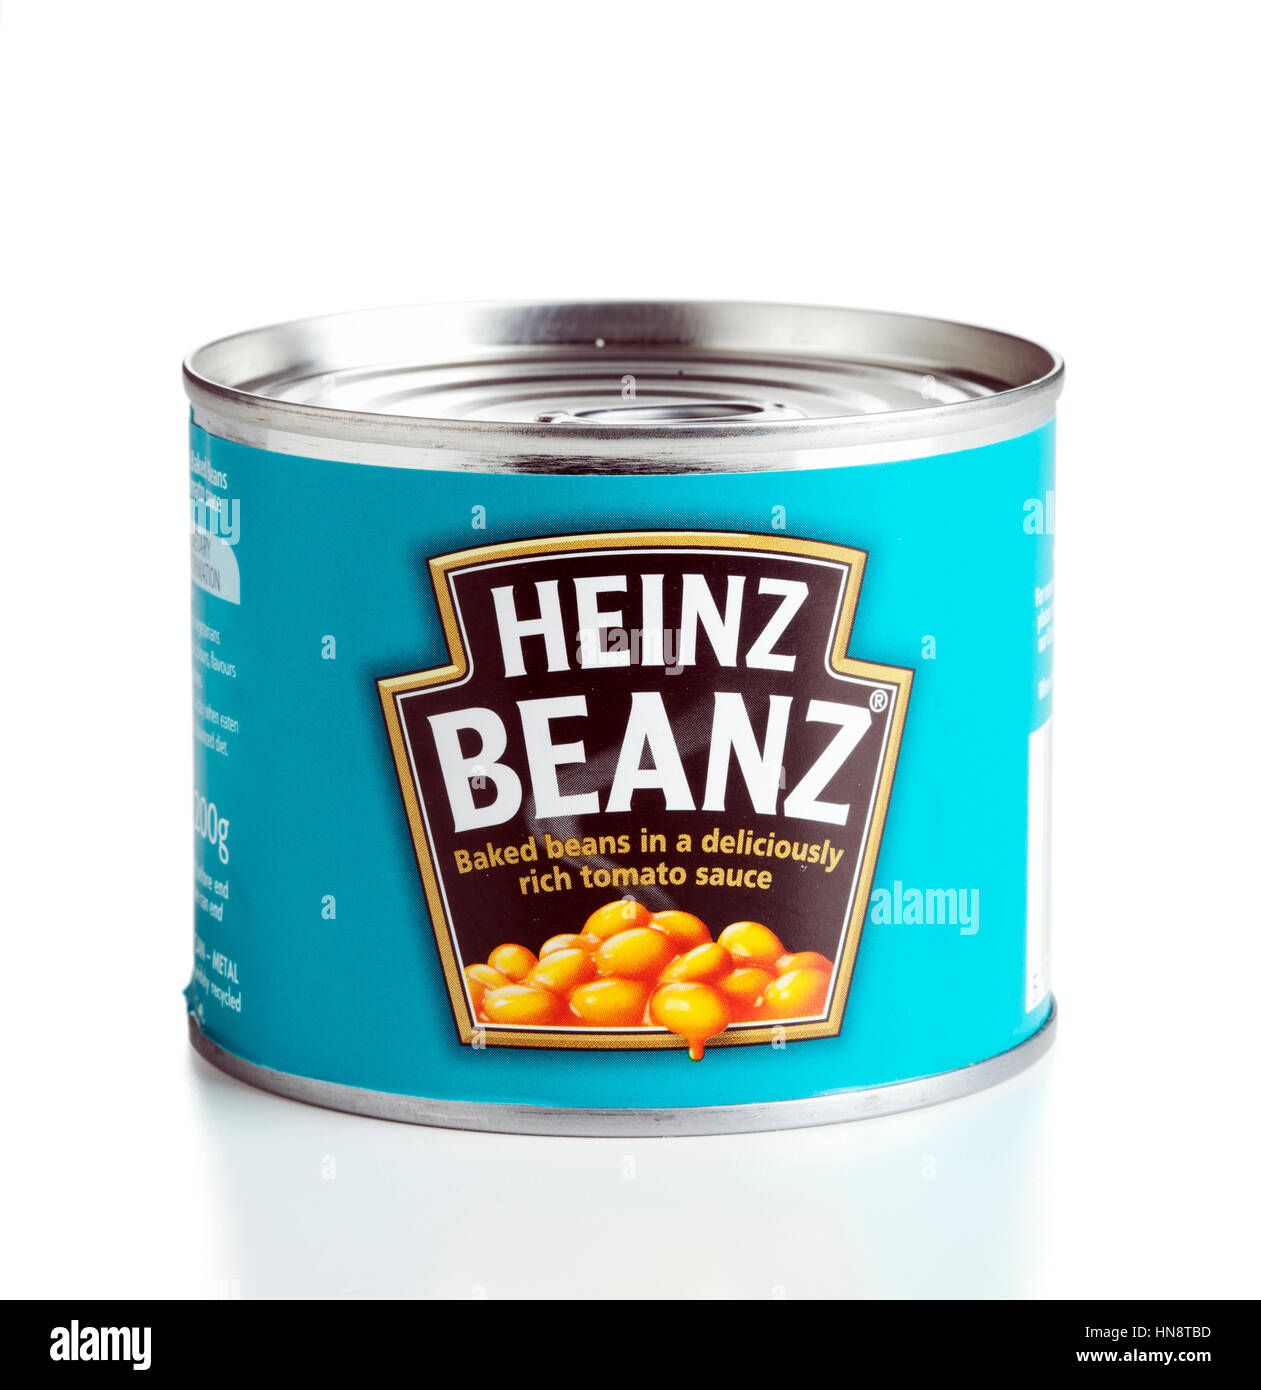 A 200 g can of Heinz Beanz baked beans in tomato sauce isolated on white background. The can was produced and purchased in the United Kingdom. Stock Photo